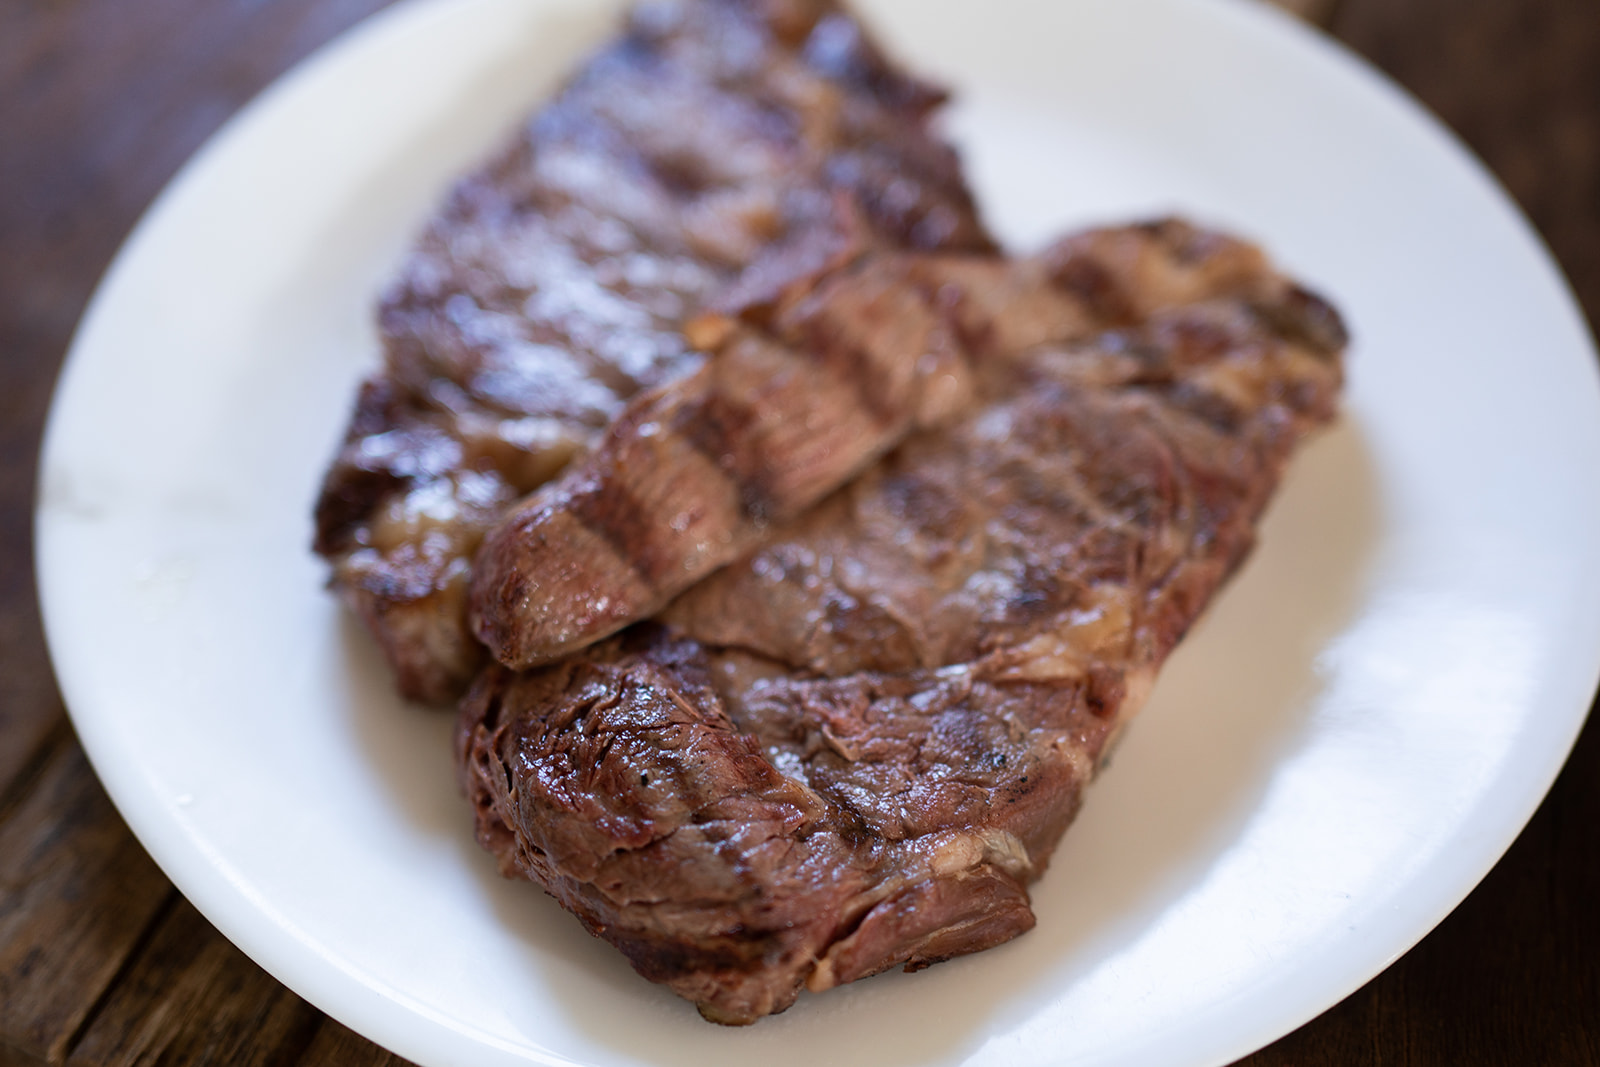 A barbequed Boneless Ribeye with grill marks.